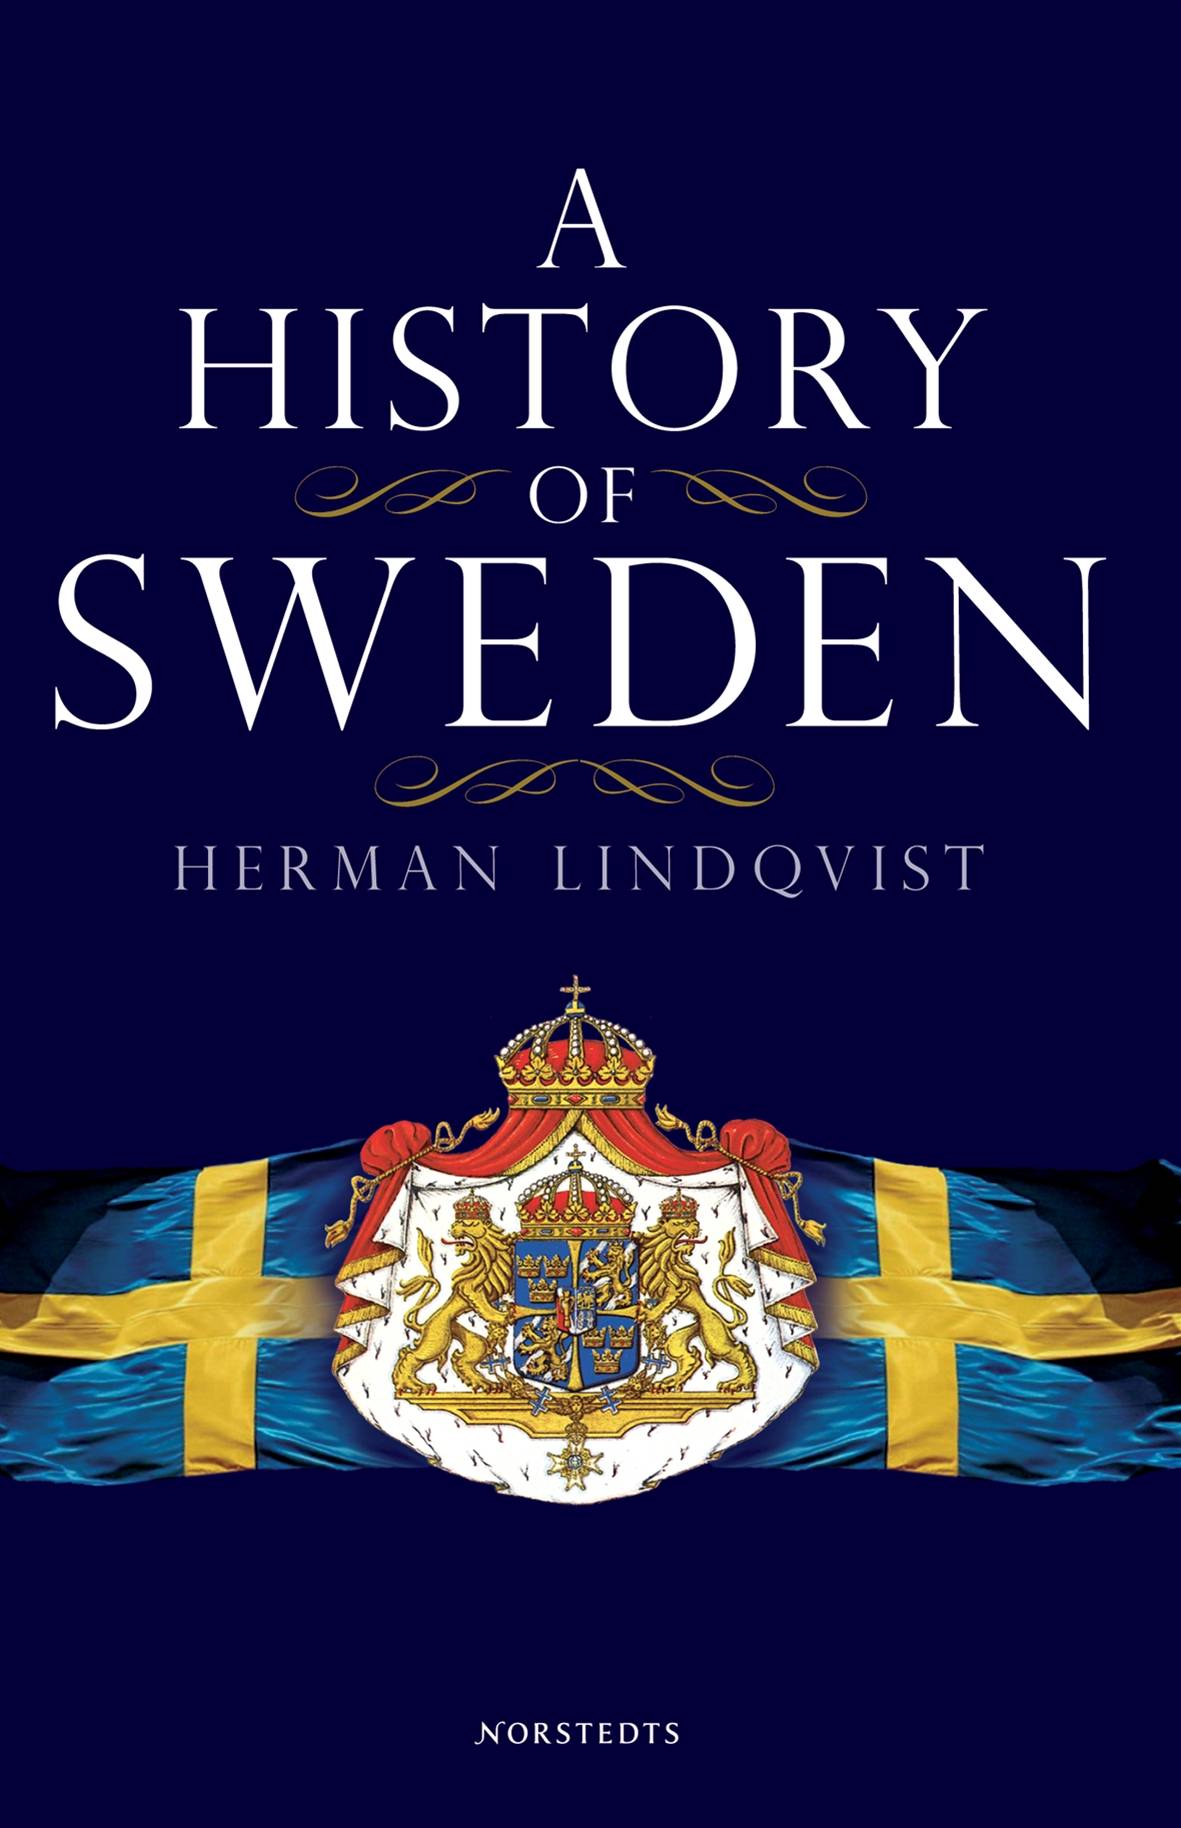 A History of Sweden : From Ice Age to our Age